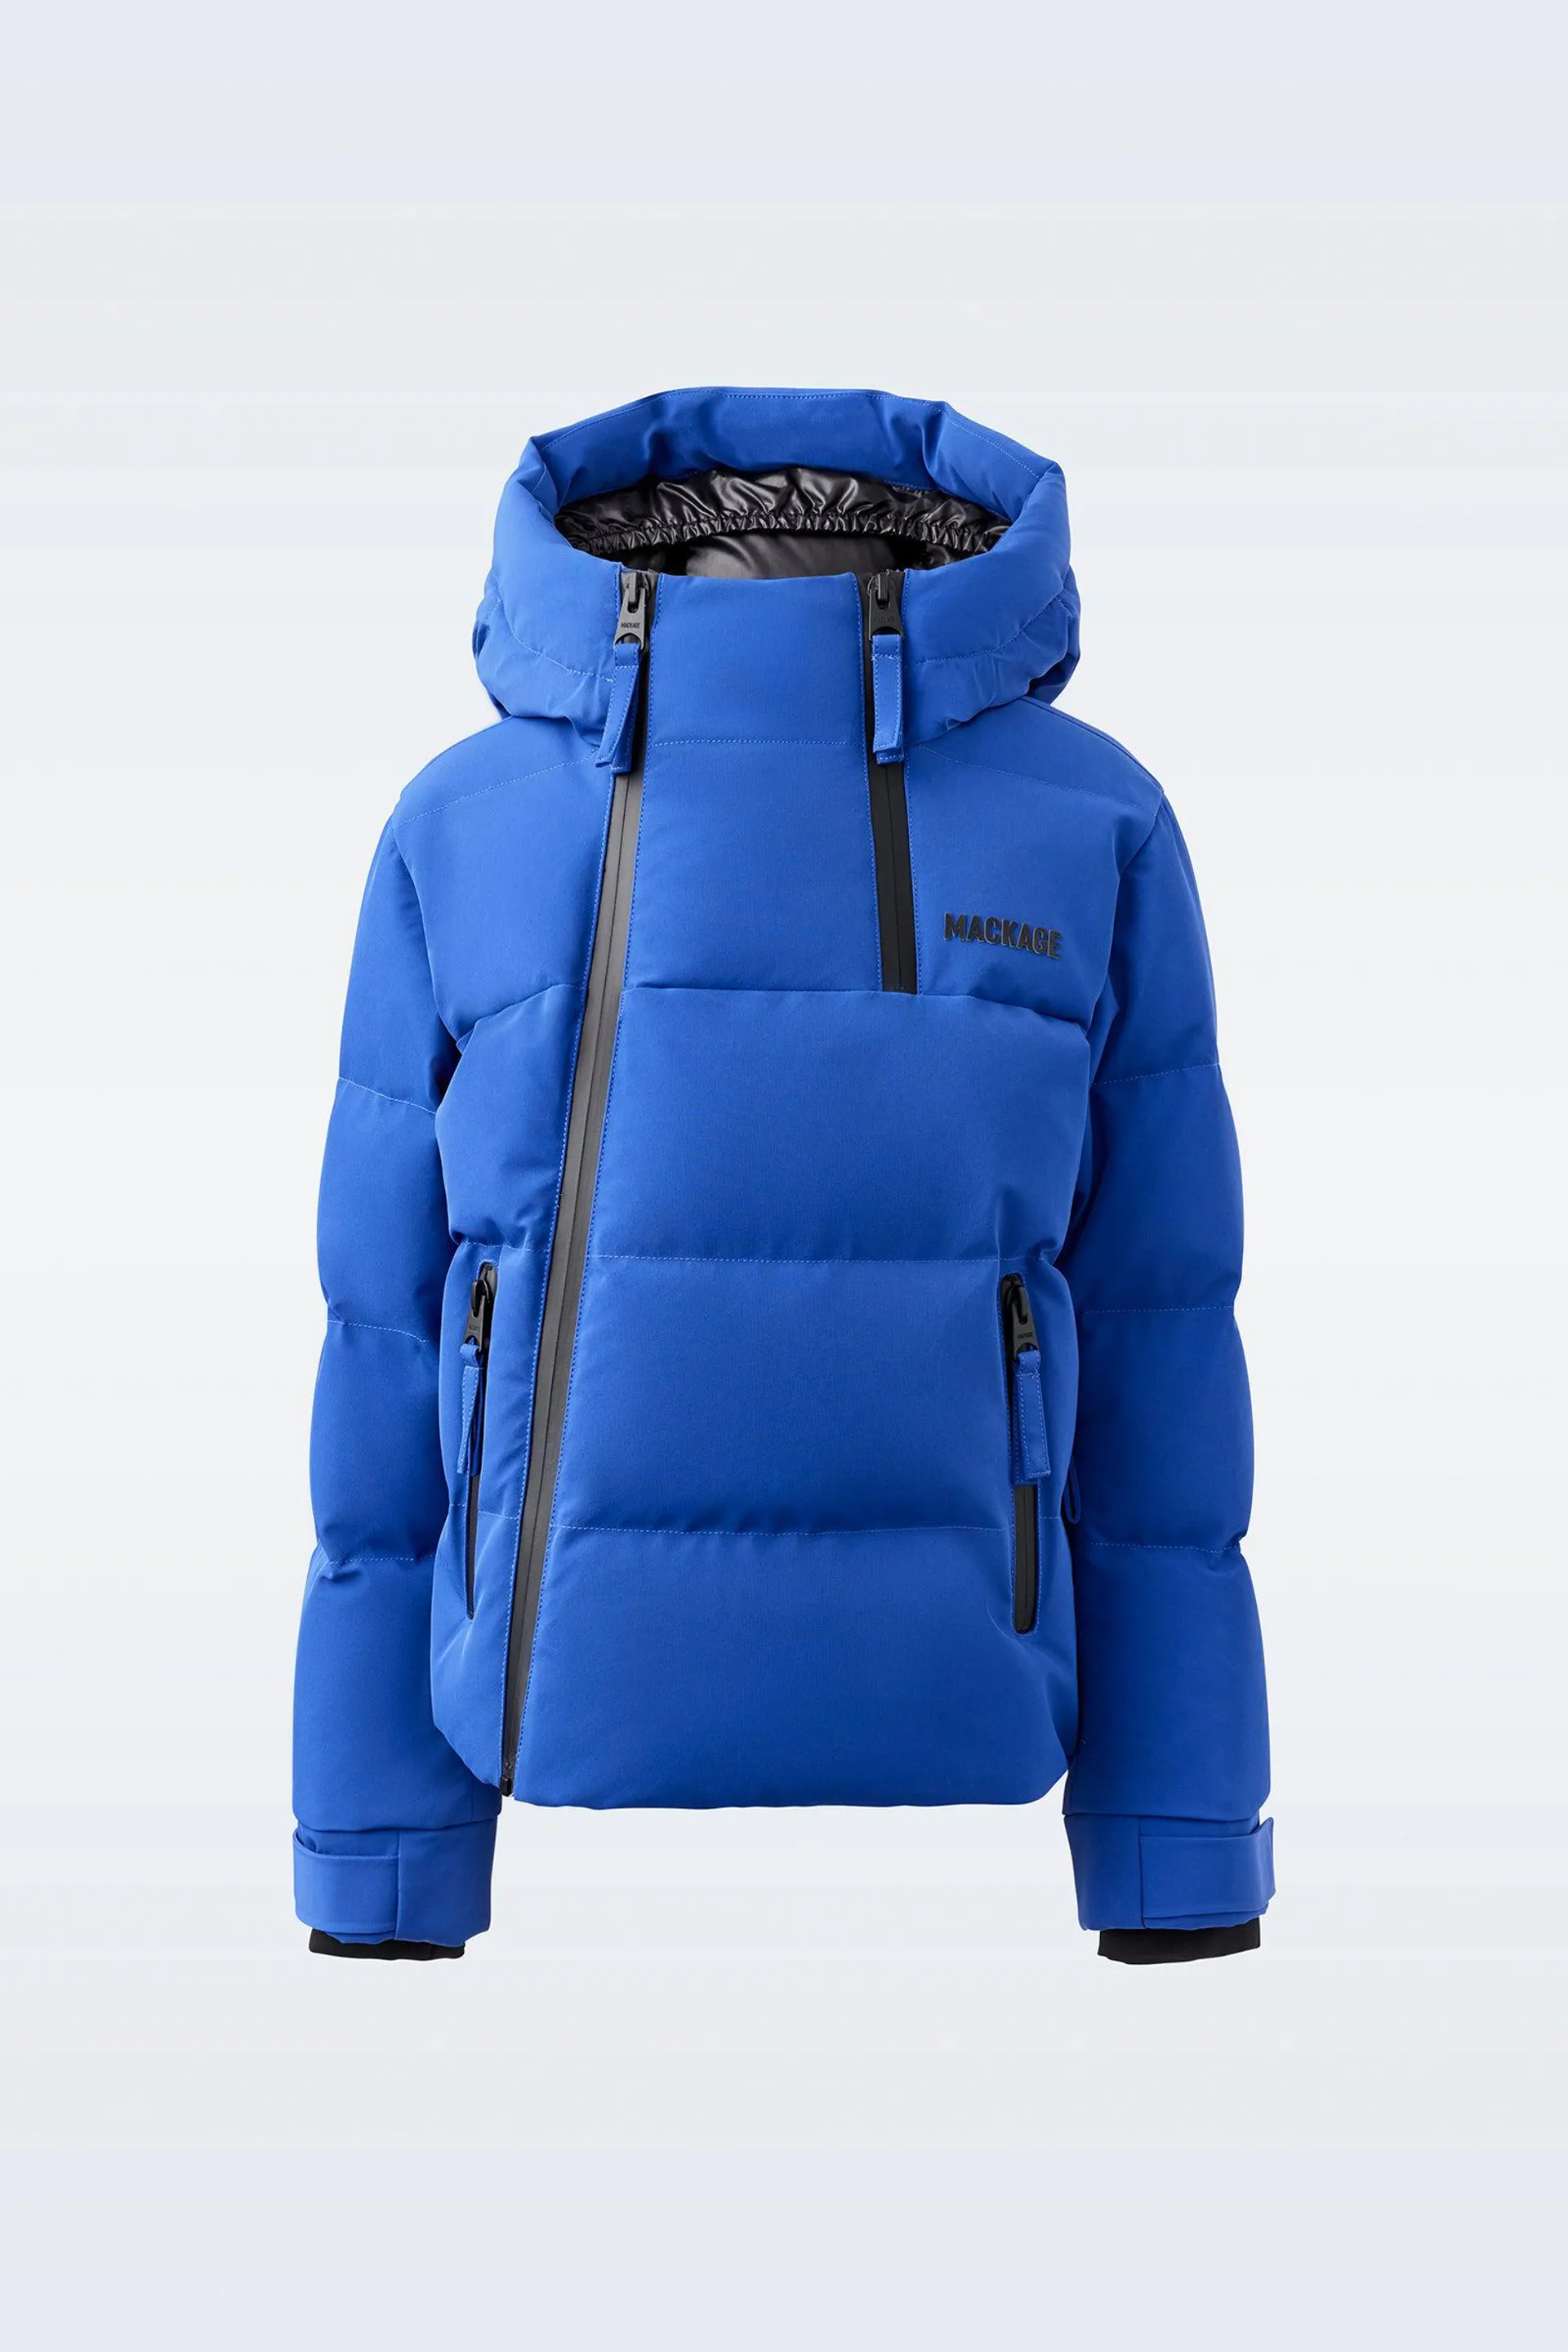 LELAND Lightweight down ski jacket with hood for kids (8-14 years)